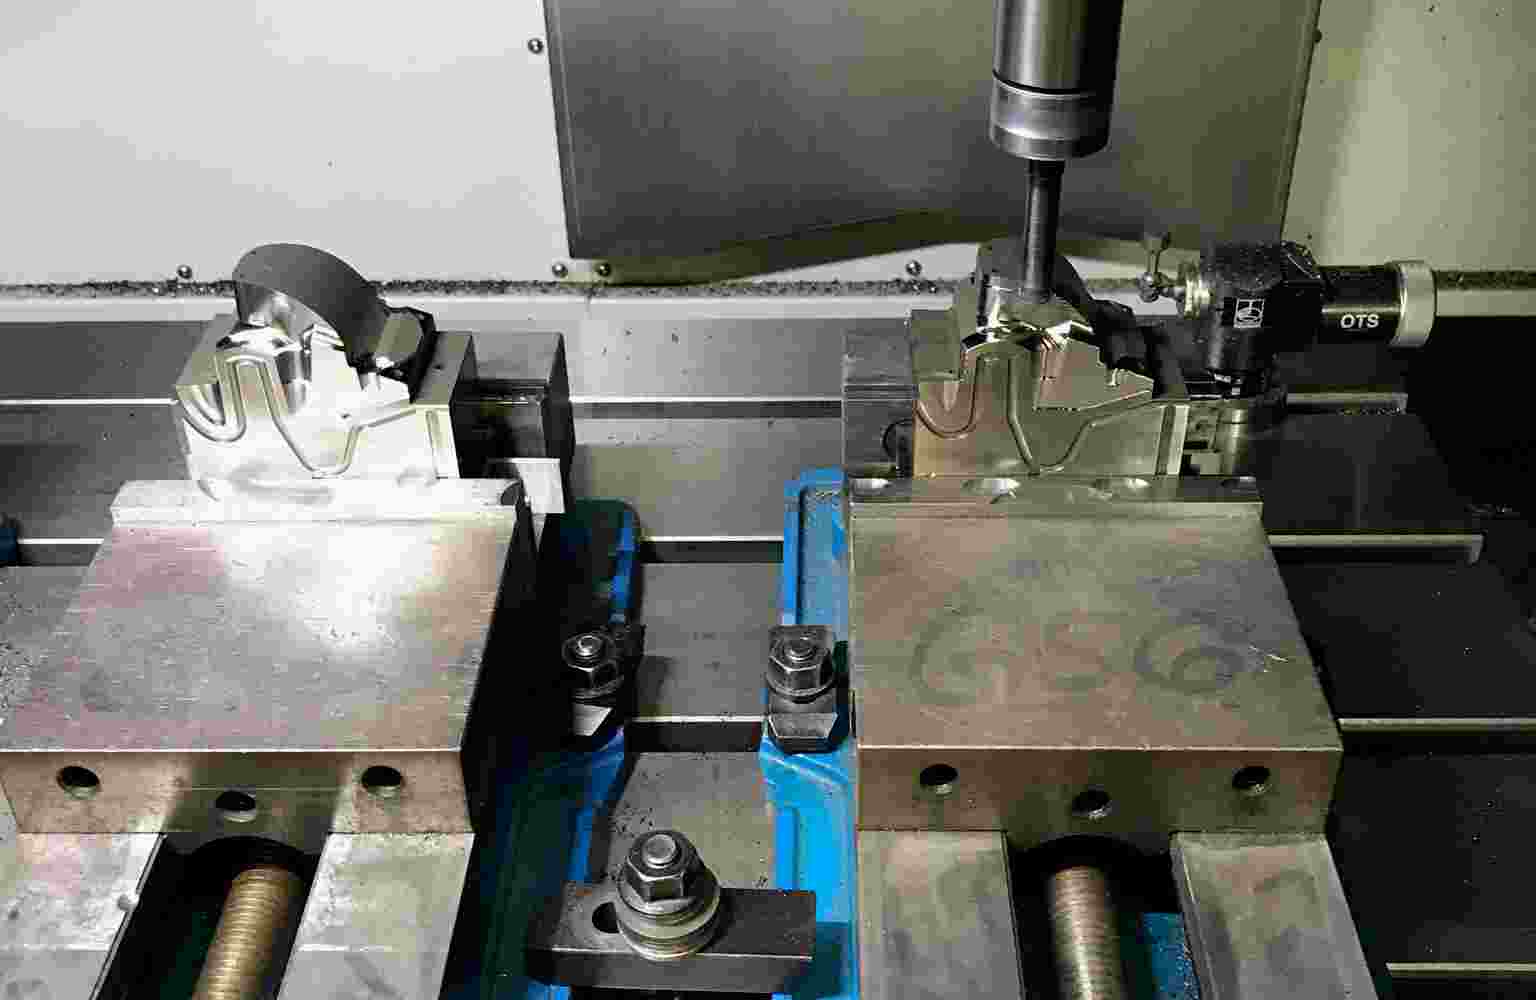 Machinery tools being repaired Tooling Services